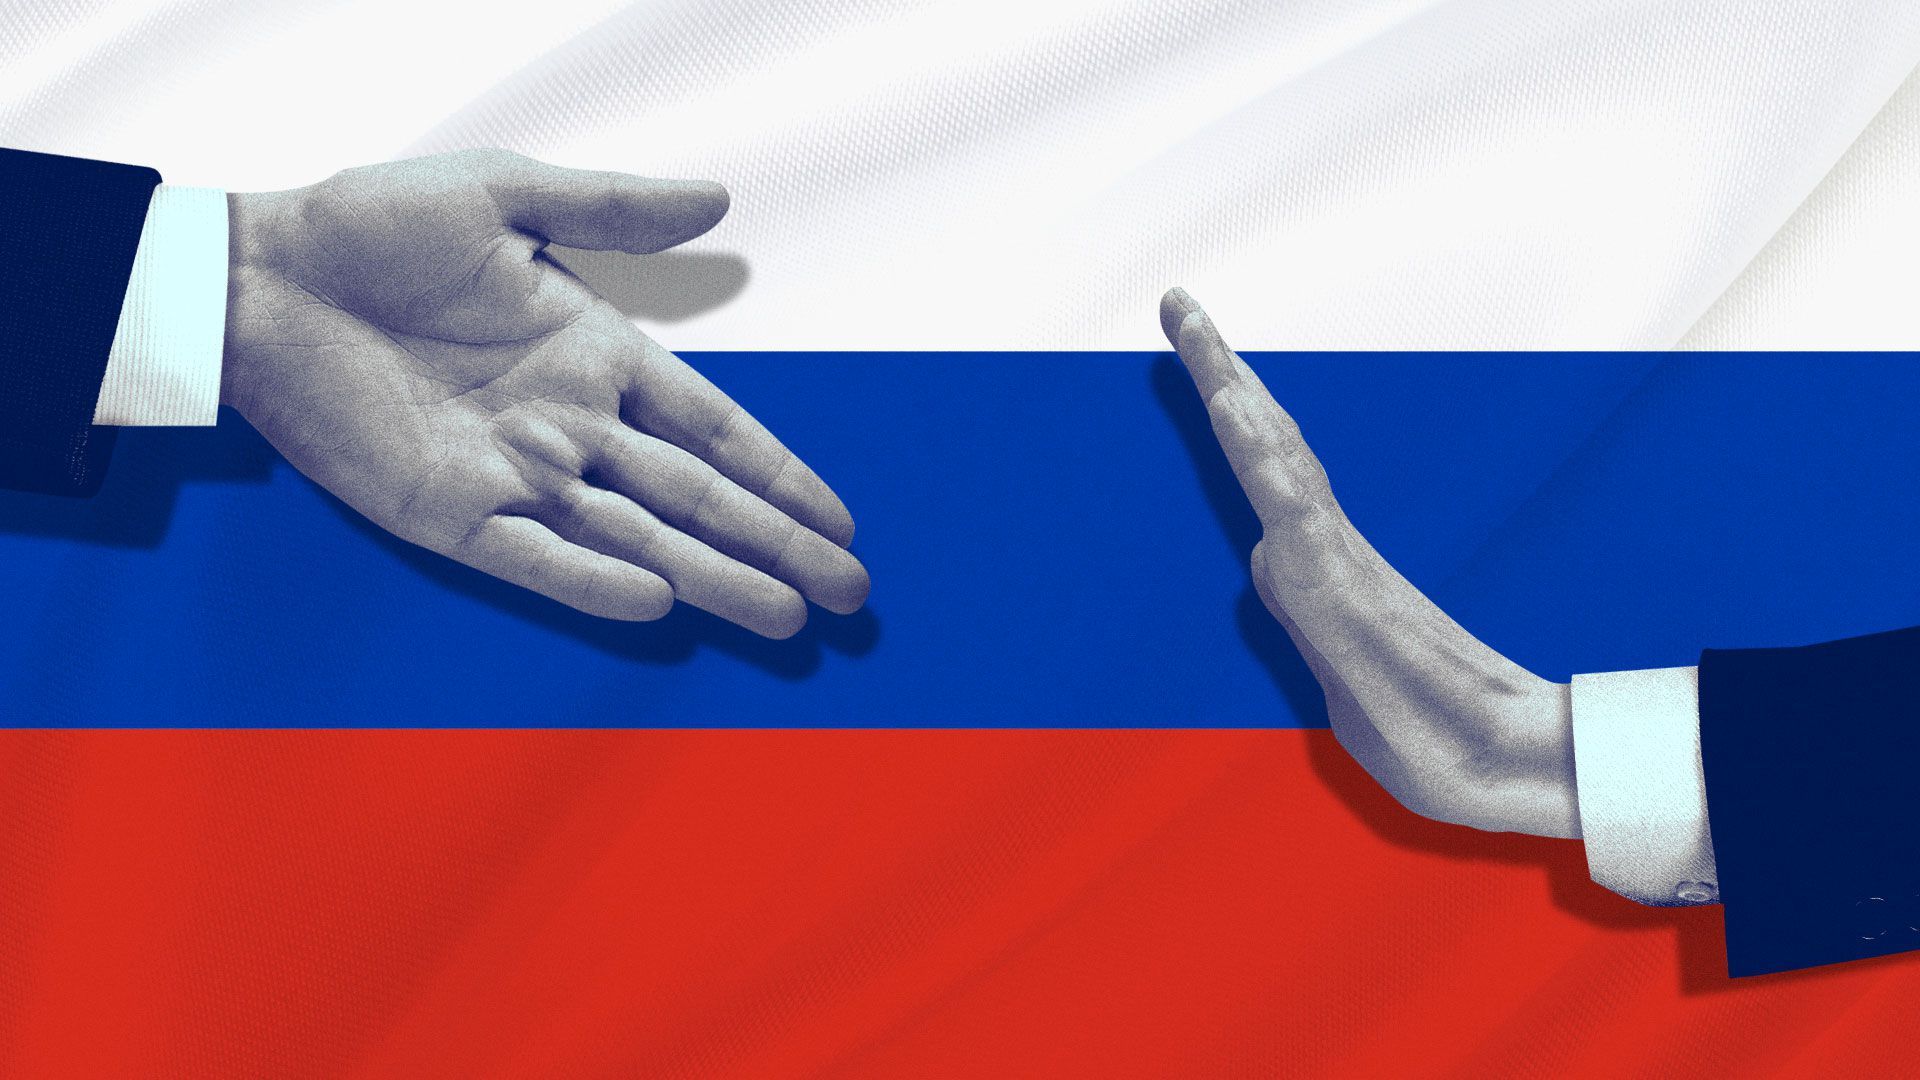 Illustration of a outstretched hand about to shake a stopped hand in front of a Russian flag